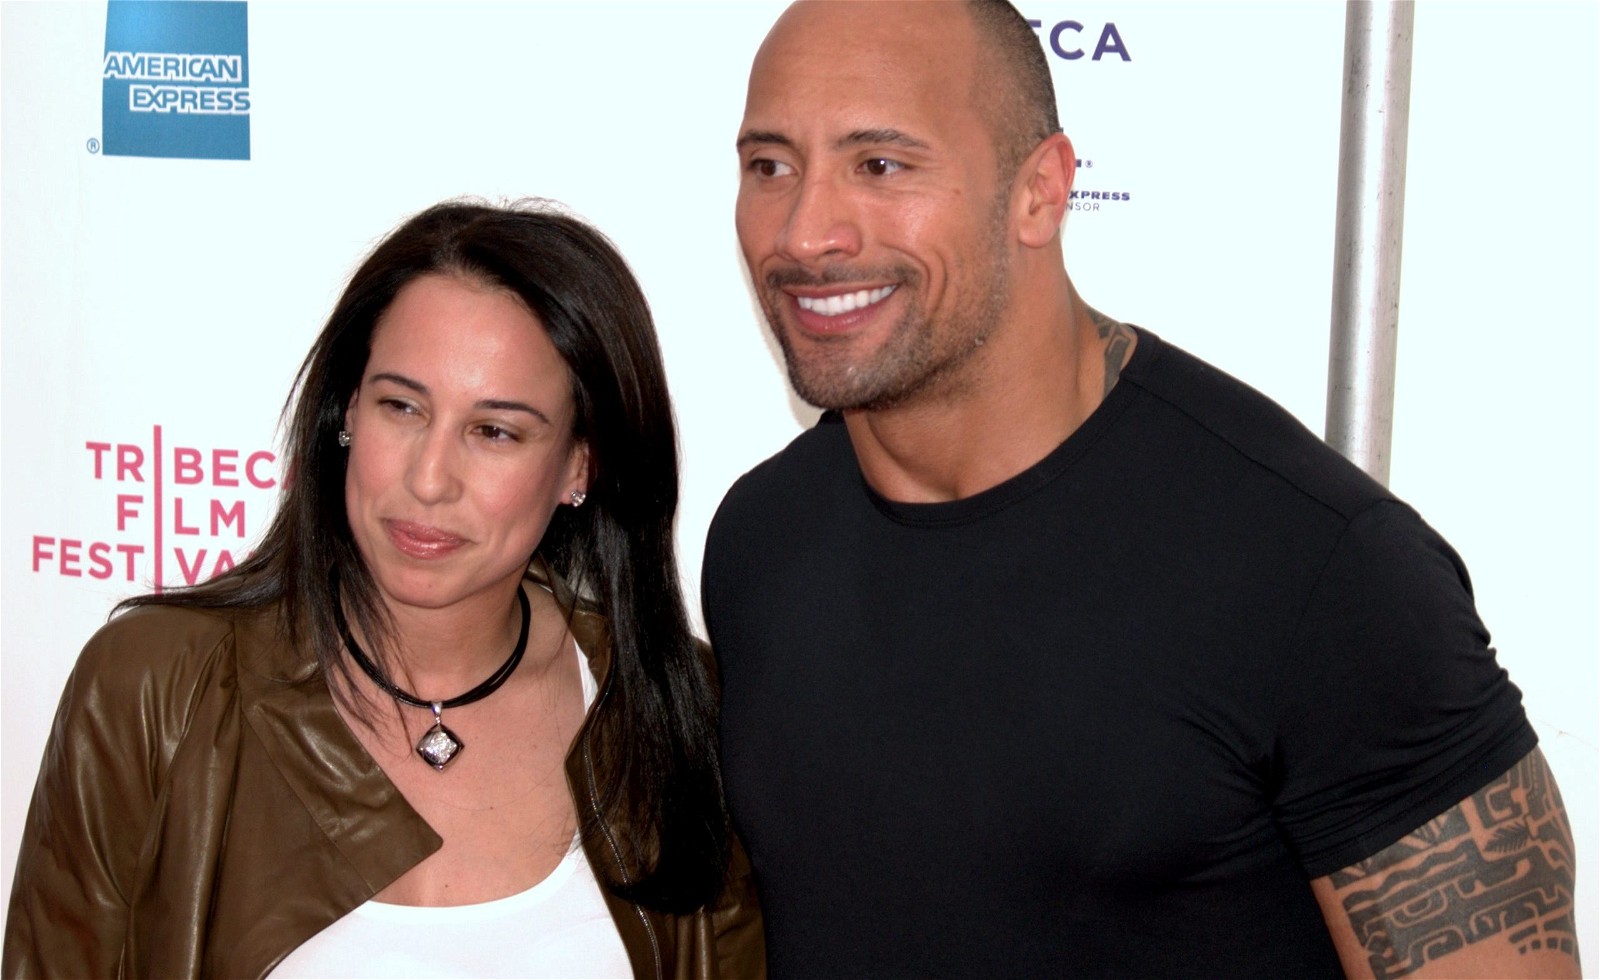 Dwayne Johnson Bares His Muscles in Tight Tank Top After His 'Kimmel'  Appearance!, Dany Garcia, Dwayne Johnson